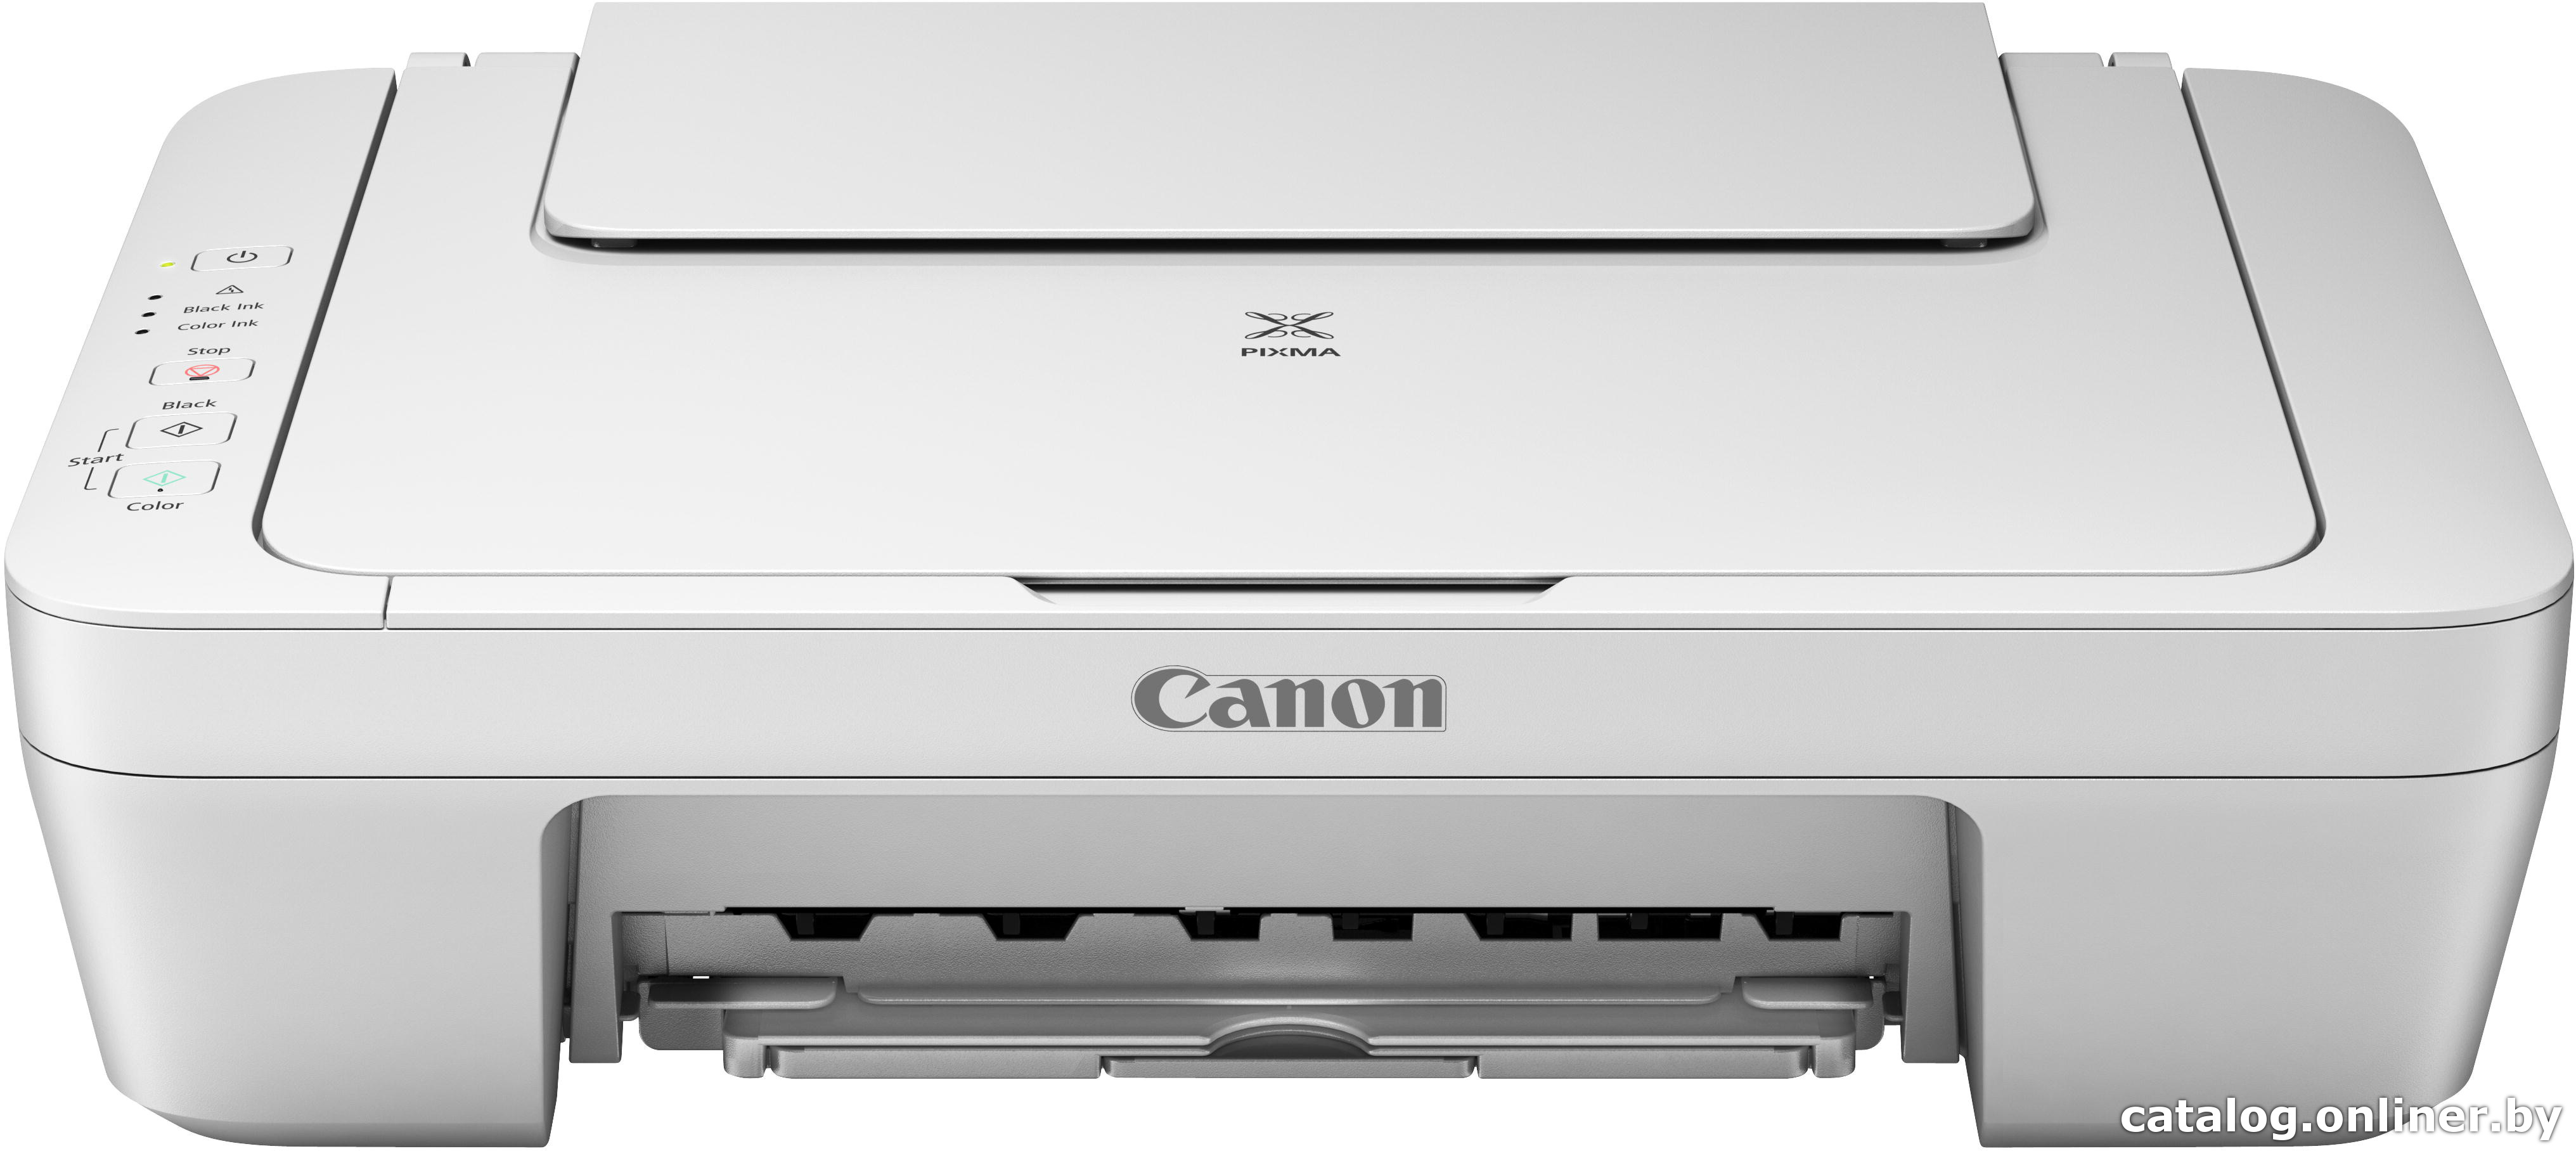 Canon MG2555S Scanner Driver Mac High Sierra 10.13 How to Download and Install - Featured